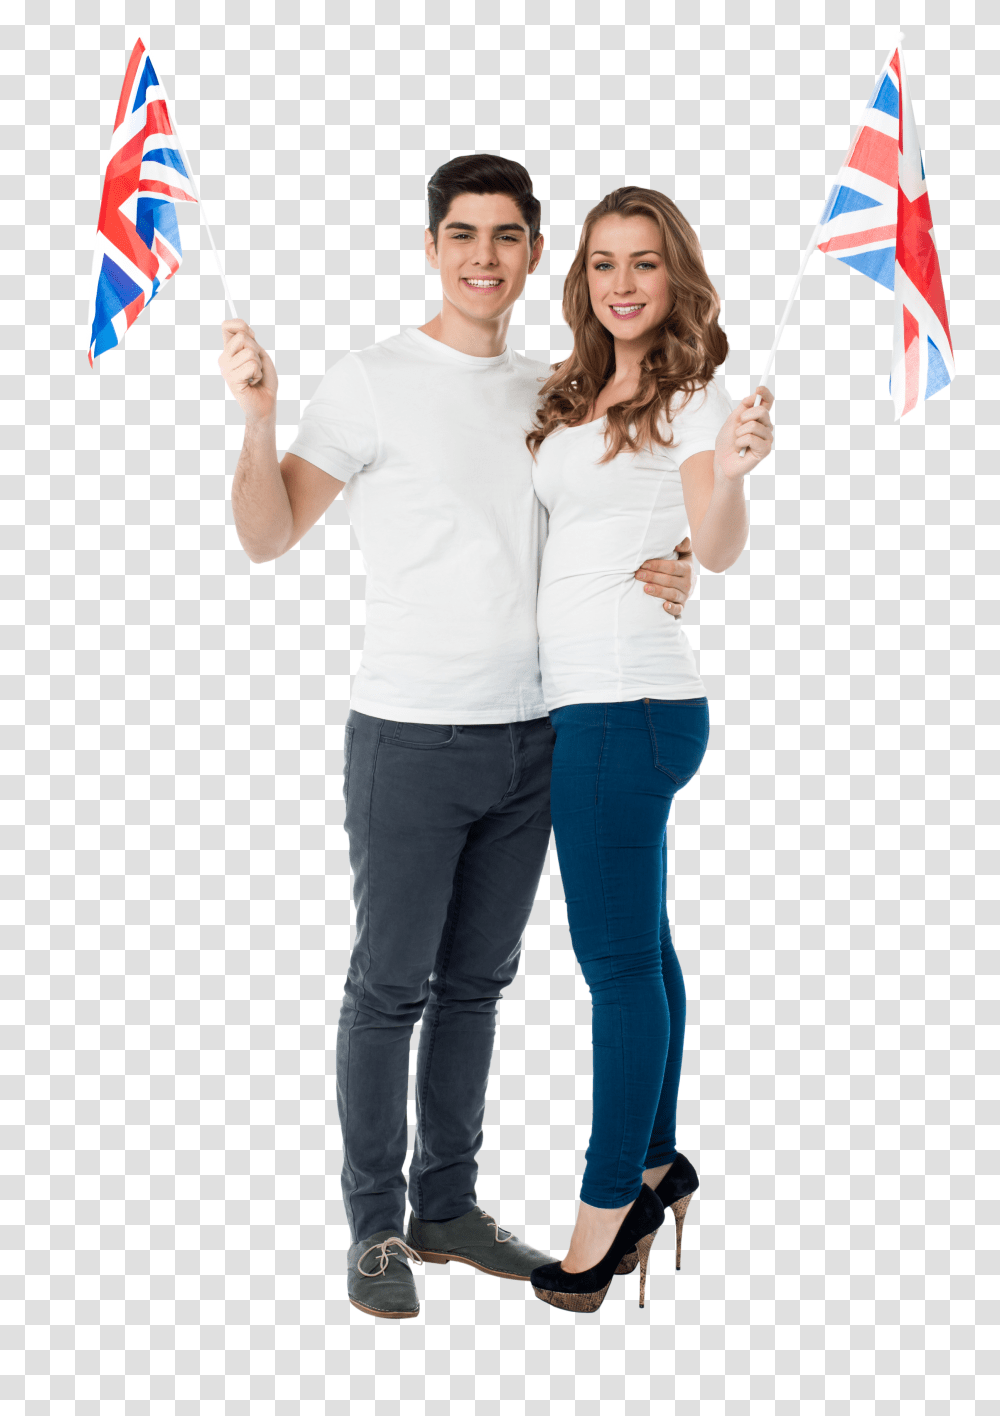 Hd Image Couple Download Couple Image Hd, Person, Female, Blonde, Woman Transparent Png